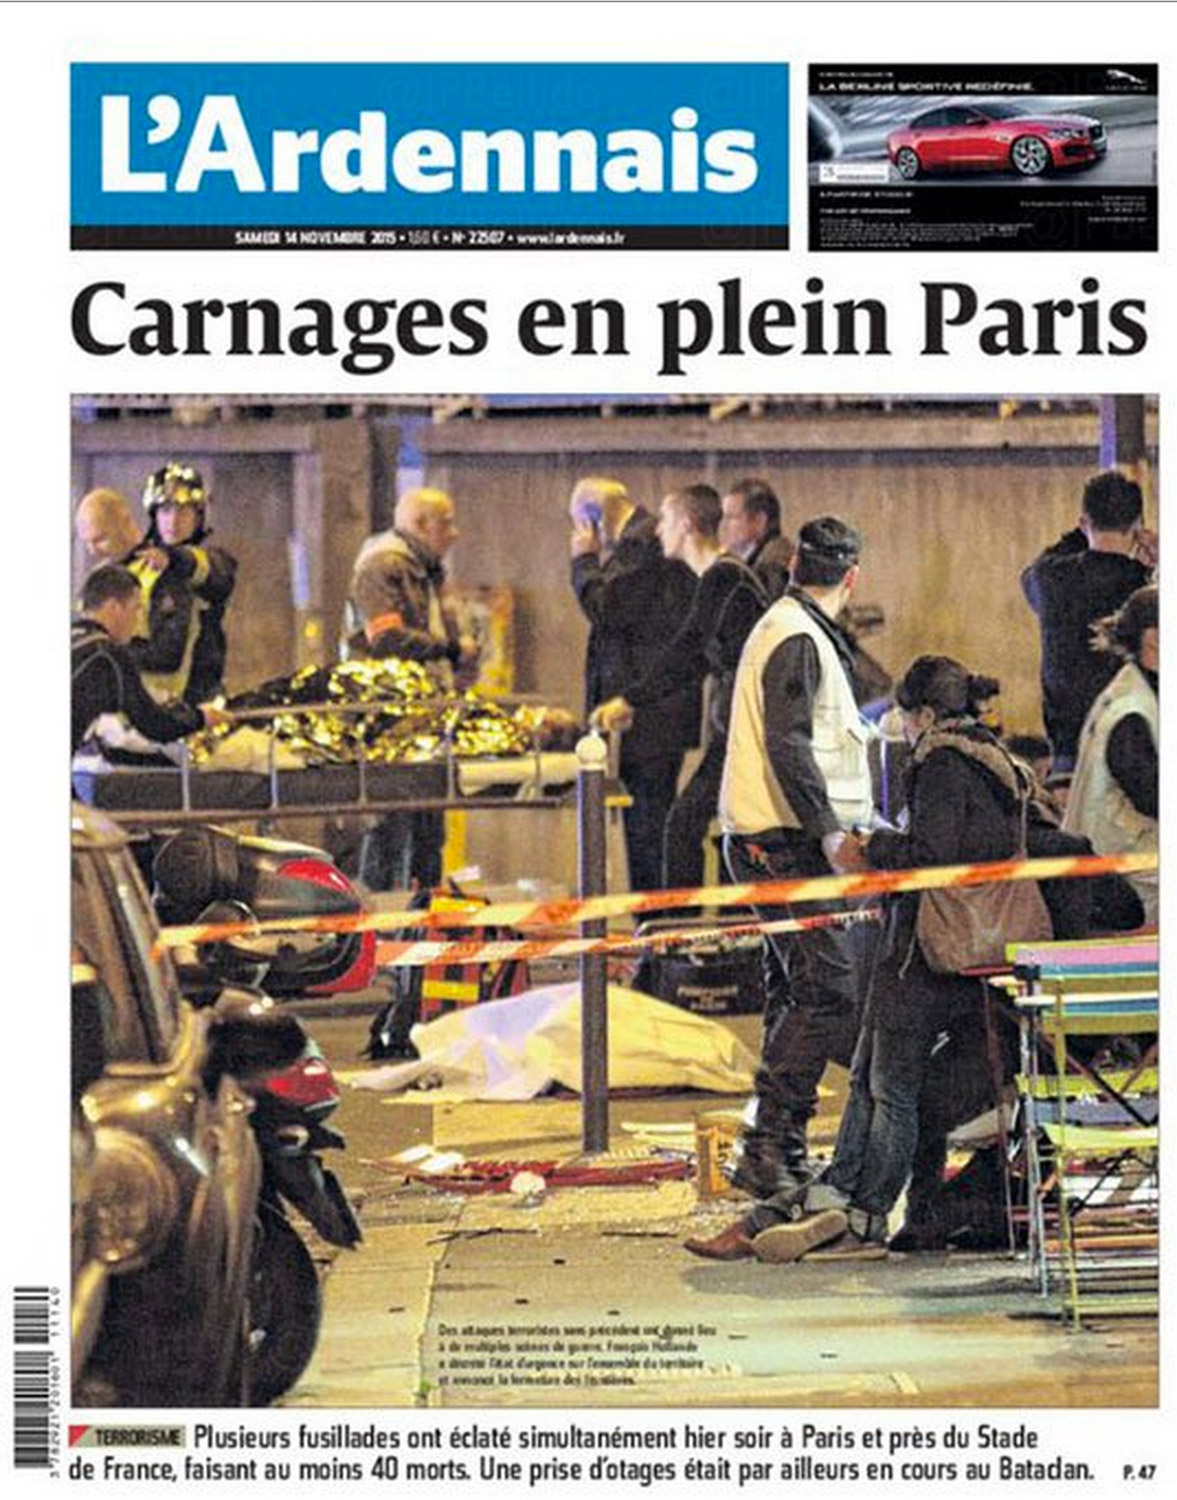 The front page of L'Ardennais after the Paris attacks on Nov. 13, 2015